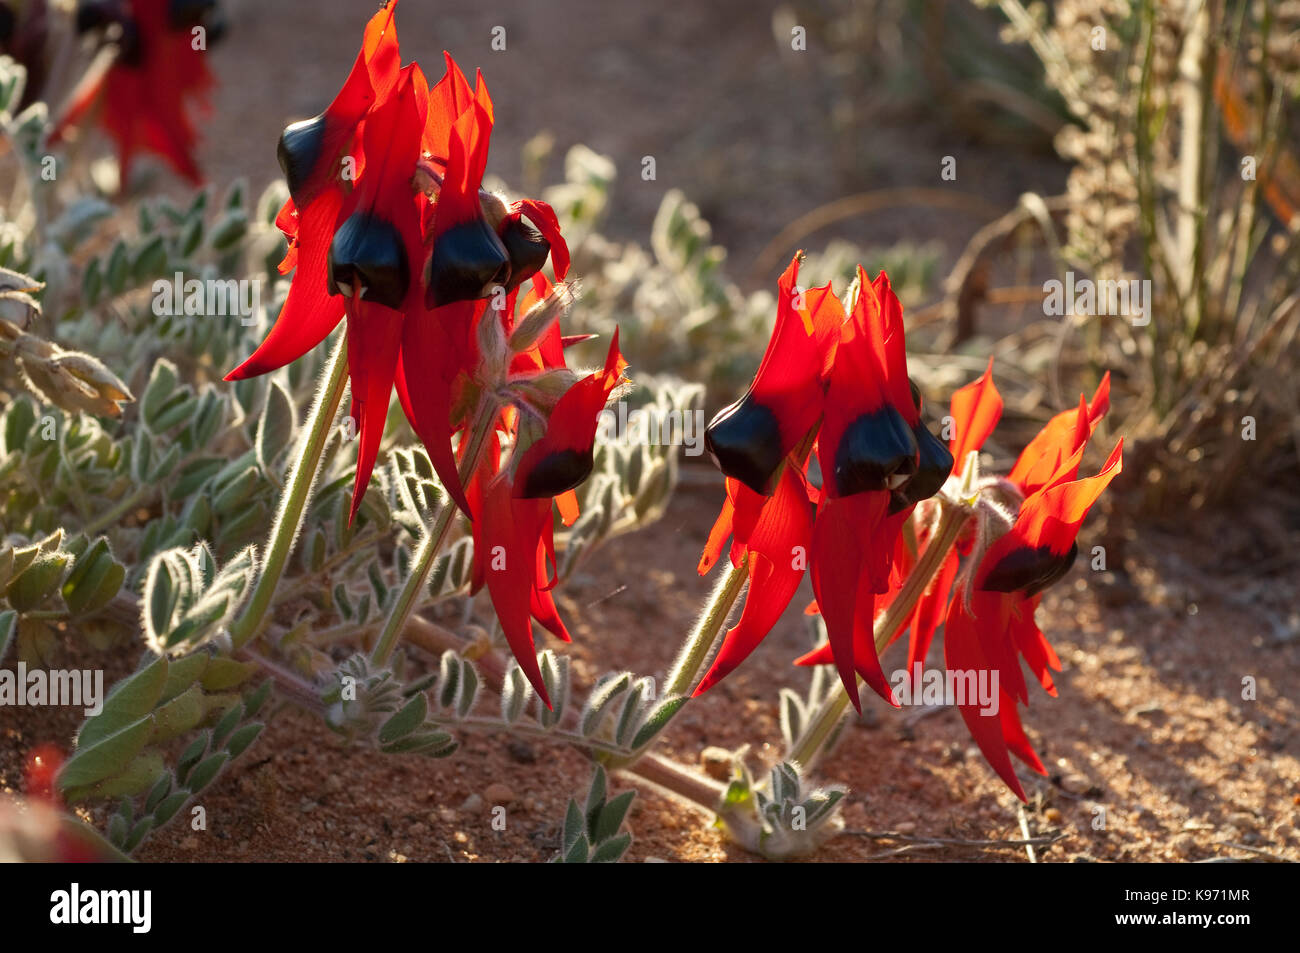 Growing wild in semi arid country near Broken Hill in Western NSW, this Sturt's Desert Pea stands out in an otherwise bland landscape. Stock Photo